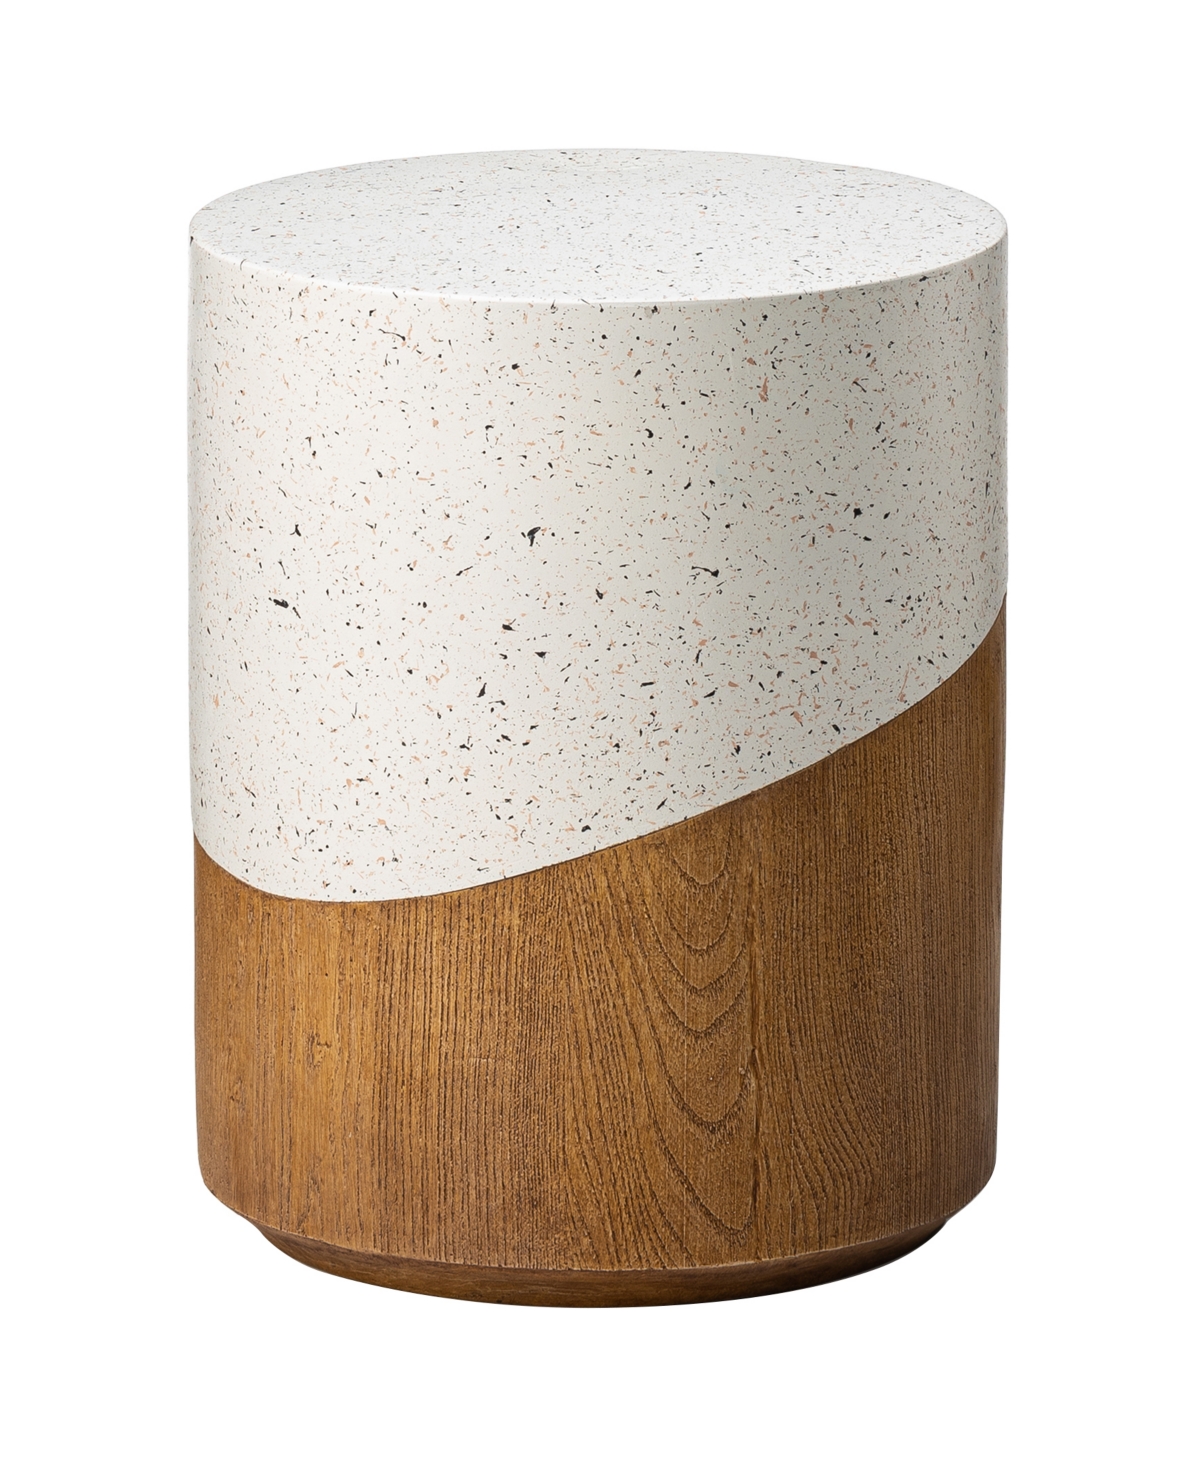 Multi-functional Faux Terrazzo and Wood Texture Garden Stool or Plant Stand - Multi